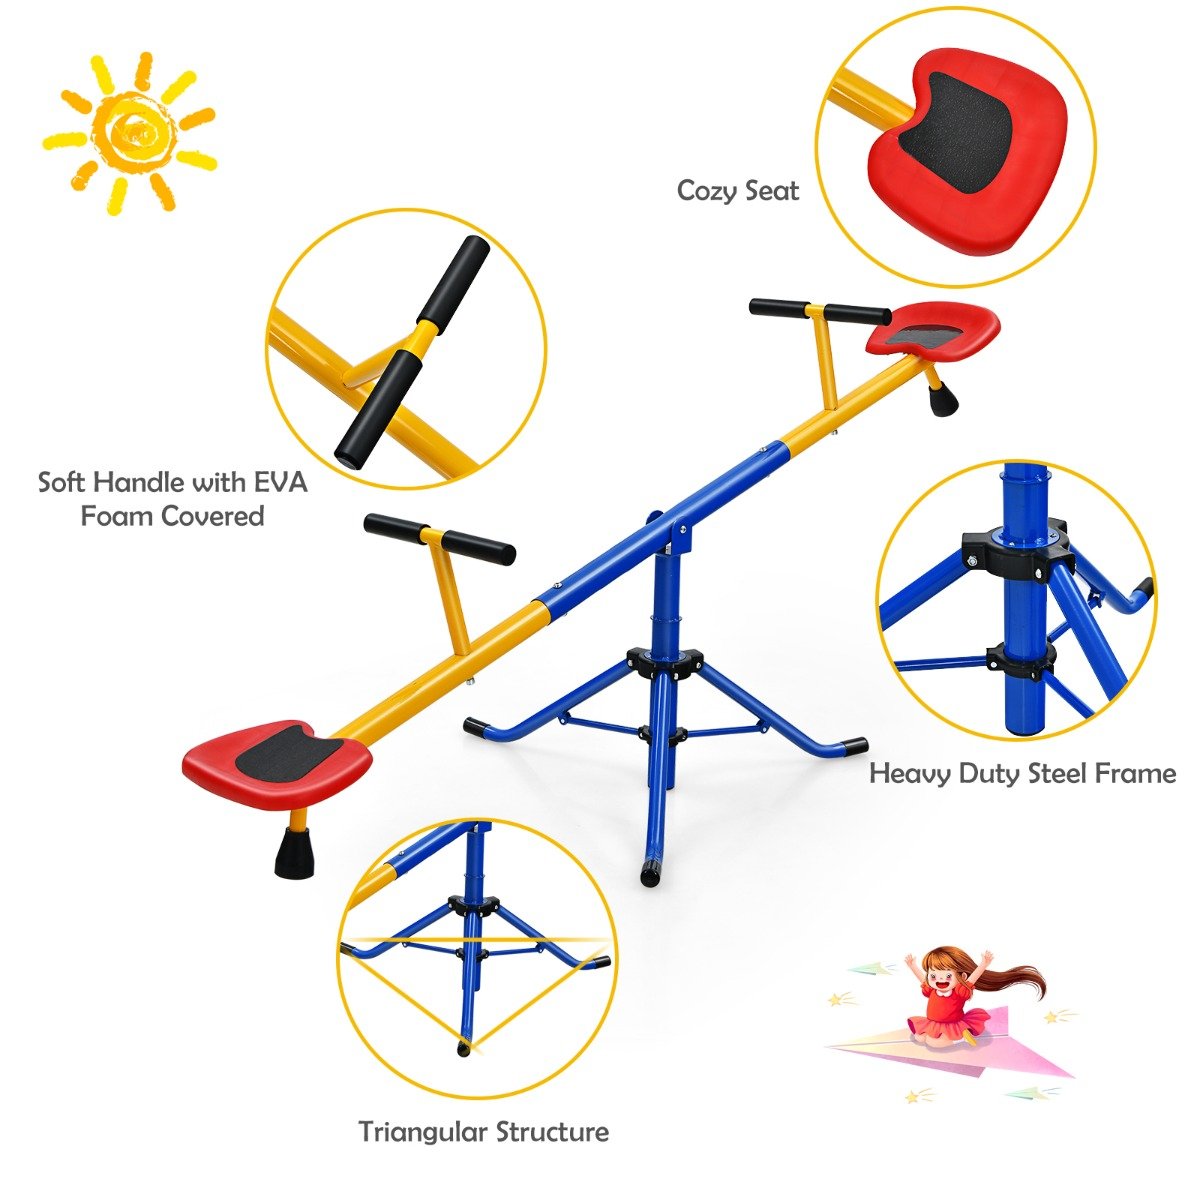 Upgrade Your Playground with a Spinning Seesaw